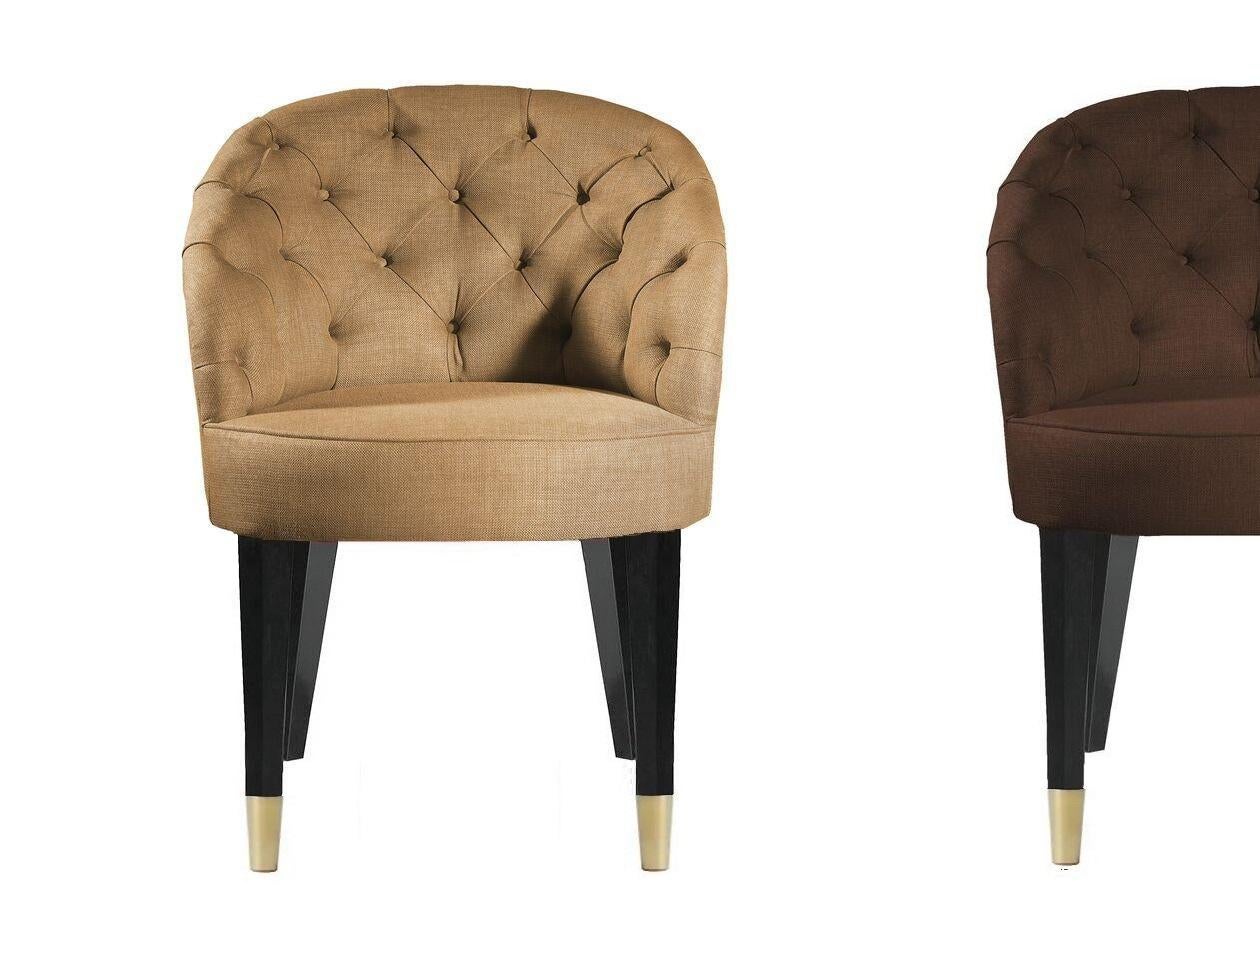 Timeless design featuring tufted back and solid wood legs in ebony finish. 
Upholstered in performance woven fabric in variety of colors.
Optional frontal legs metal caps in brass finish.
Available in other wood finishes and lacquers.
COM available